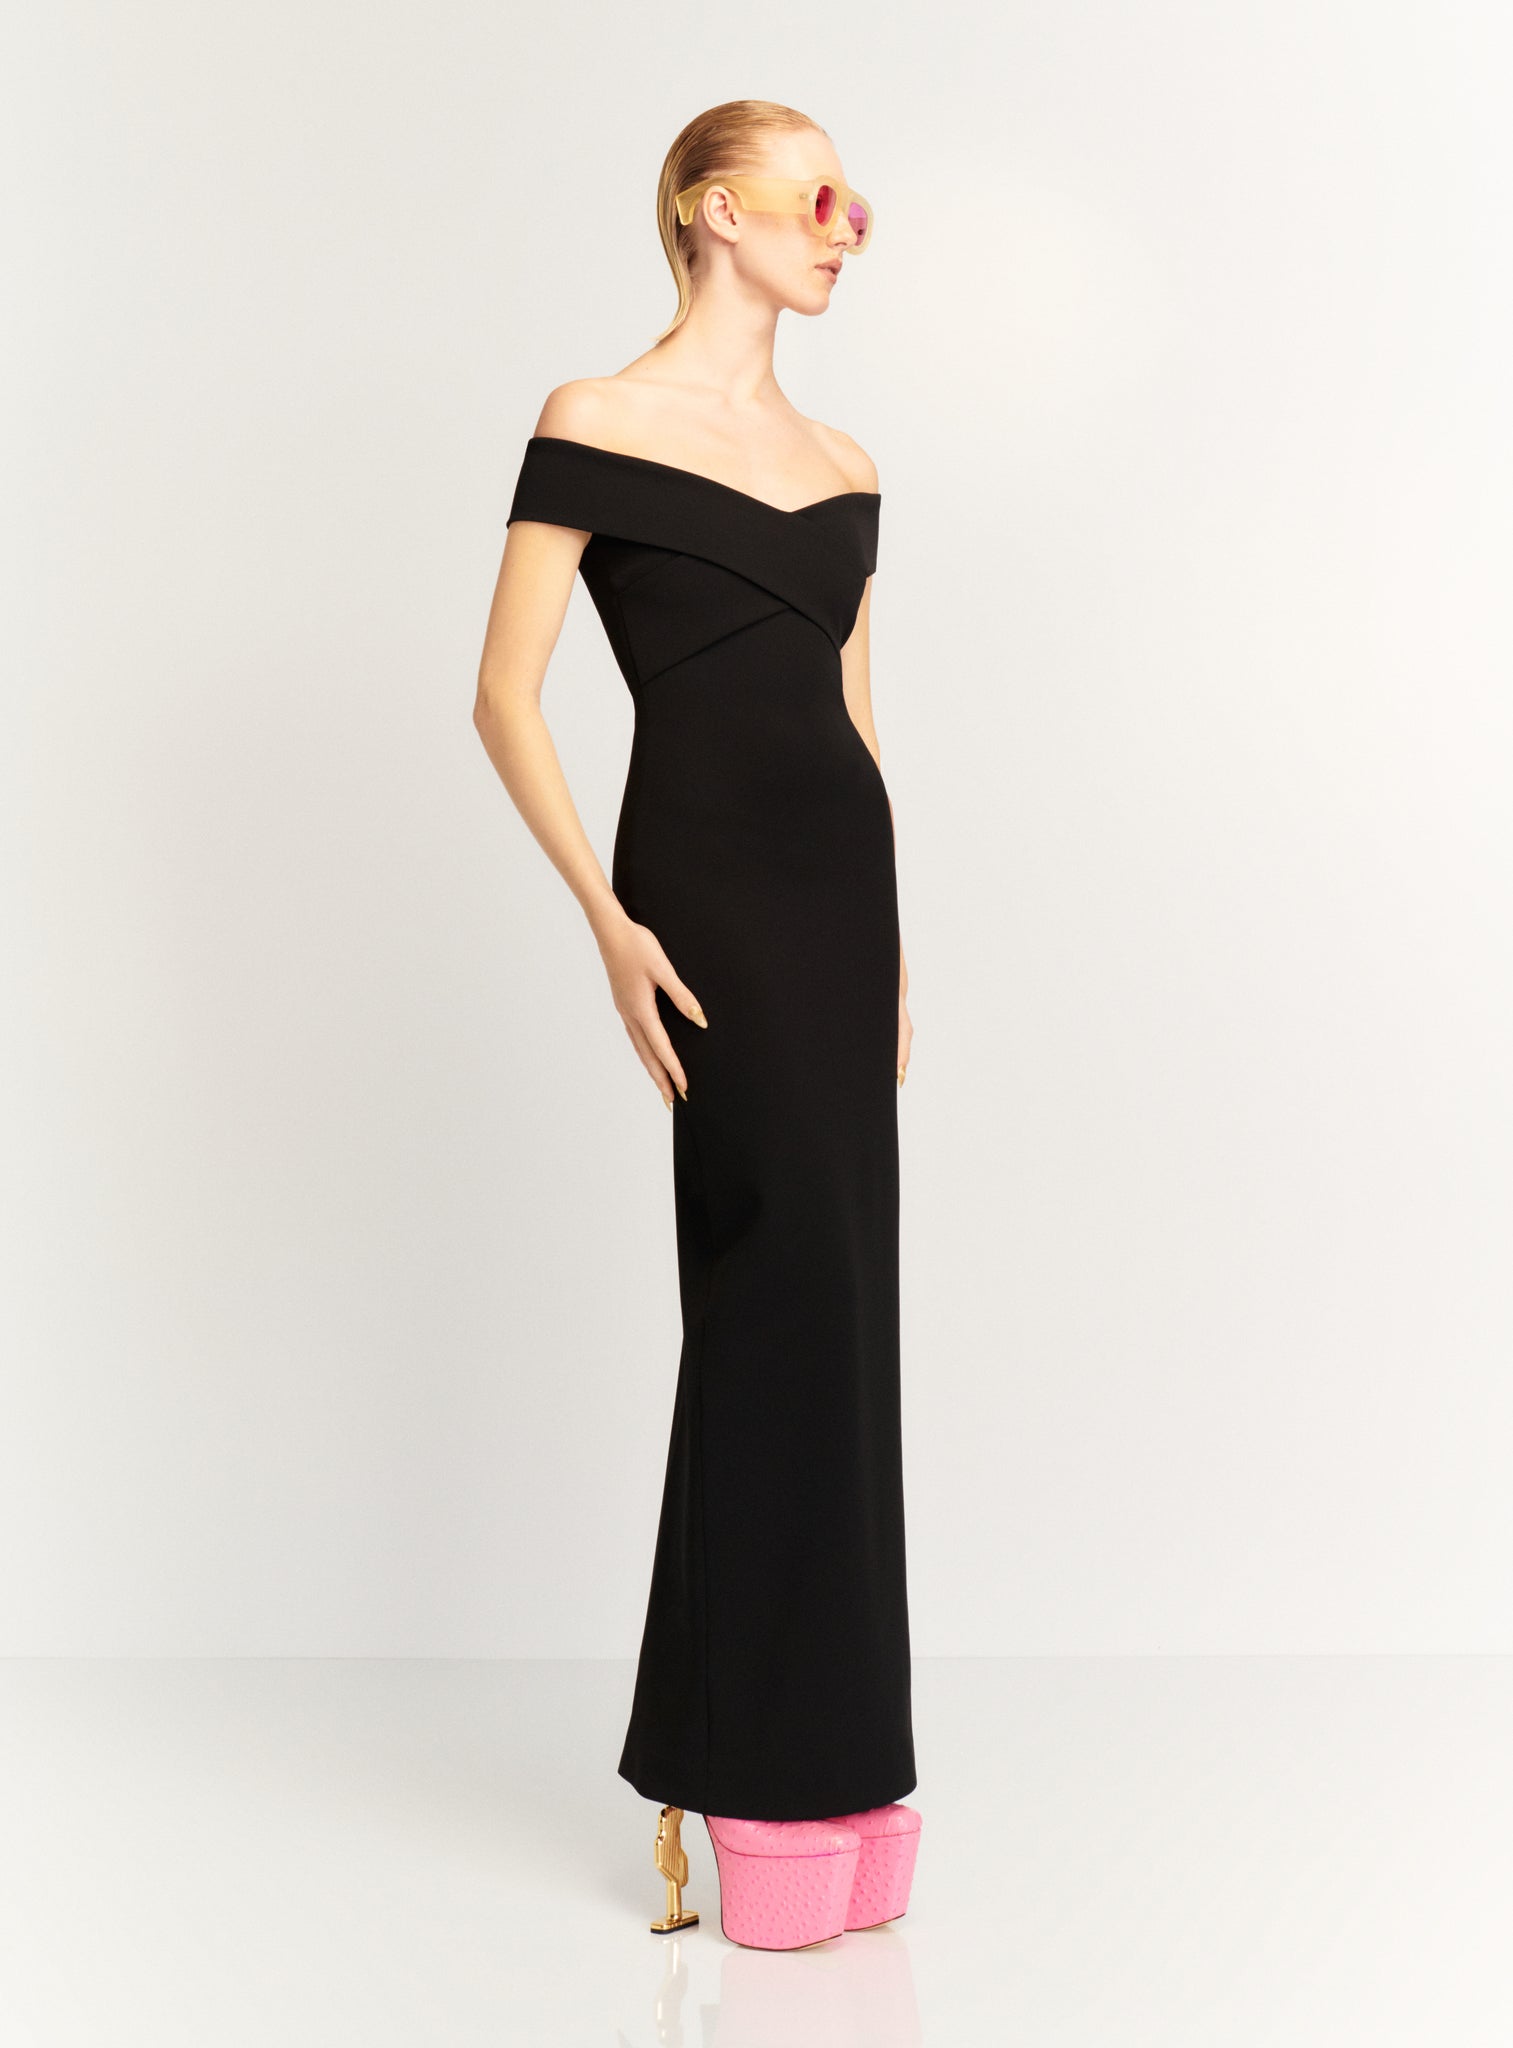 The Ines Maxi Dress in Black